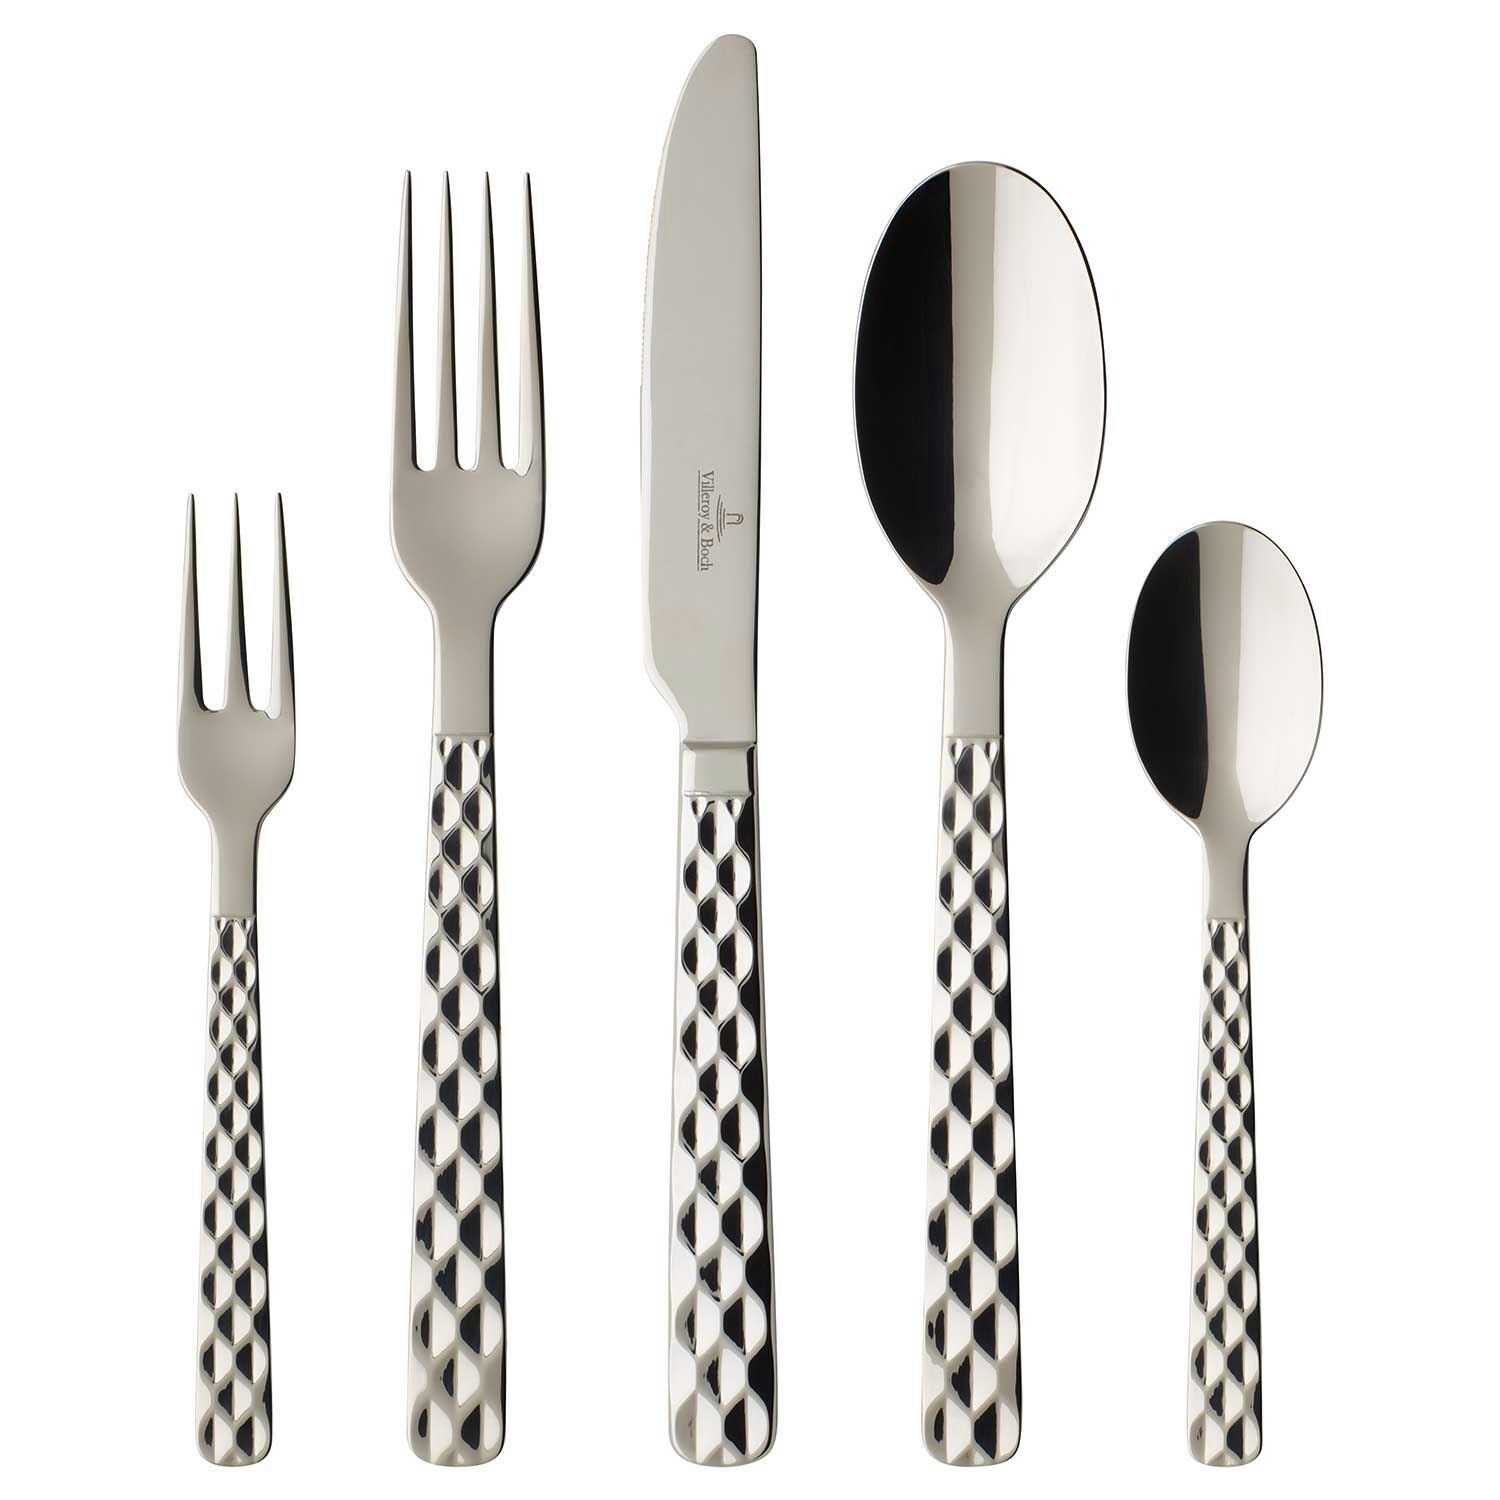 Villeroy & Boch Udine cutlery in stainless